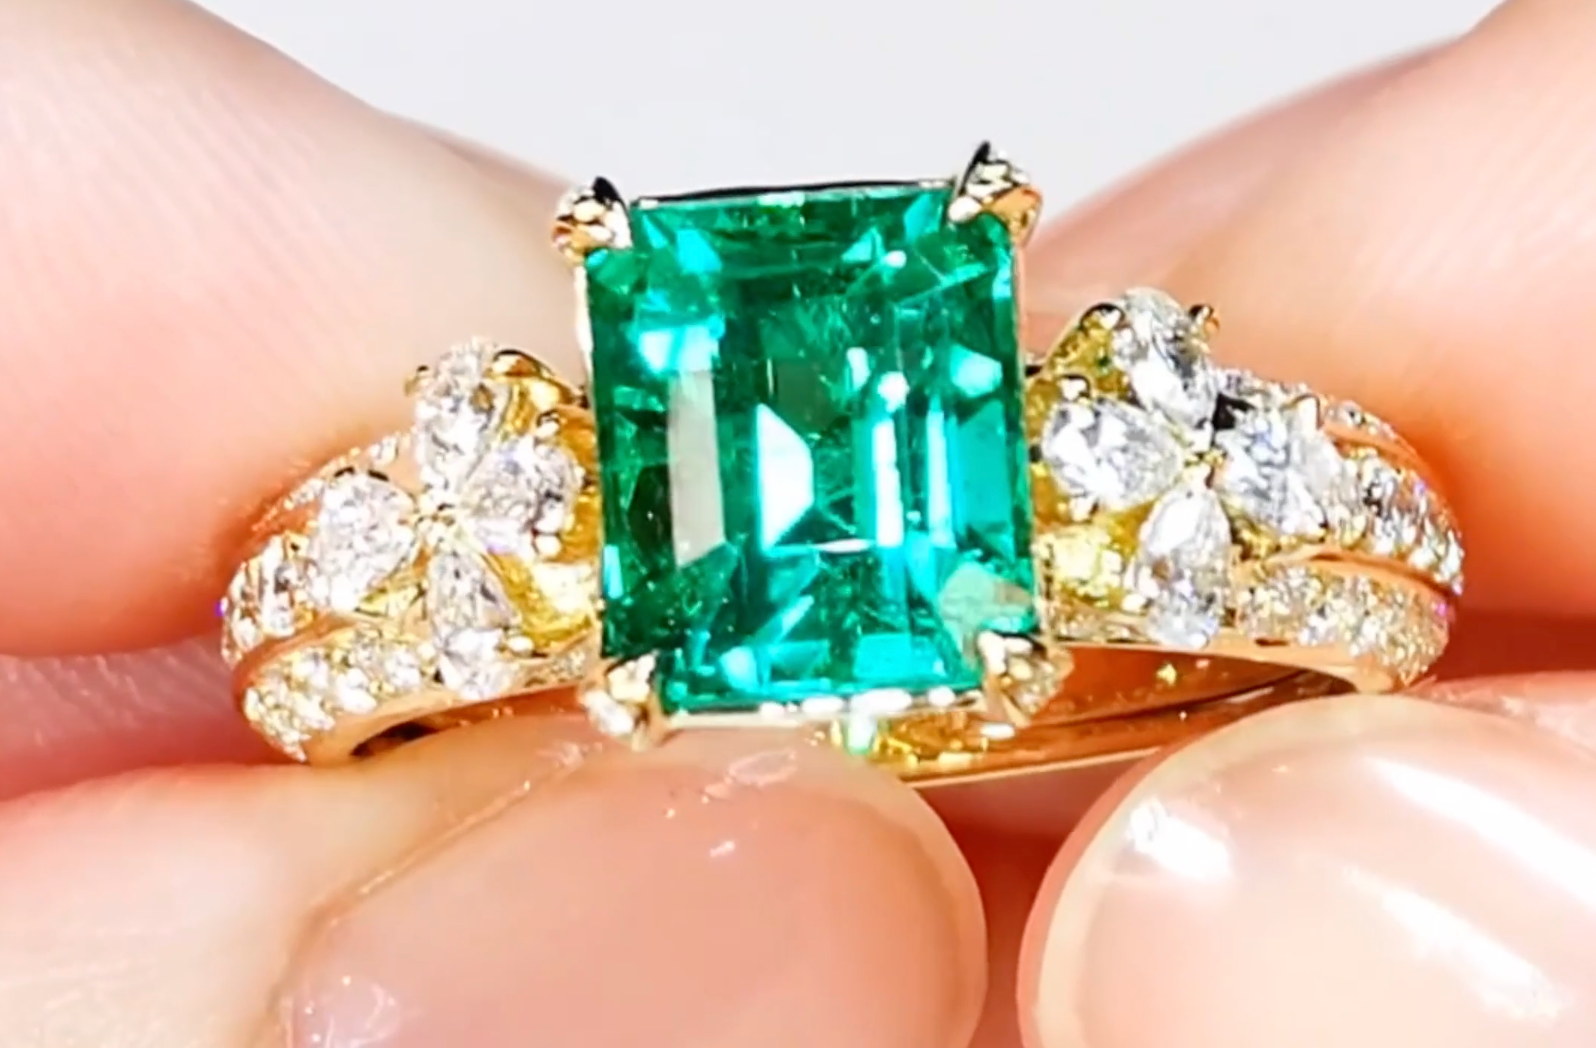 Gubelin No Oil Vivid Emerald Ring with D Flawless Diamonds set in 18K Yellow Gold